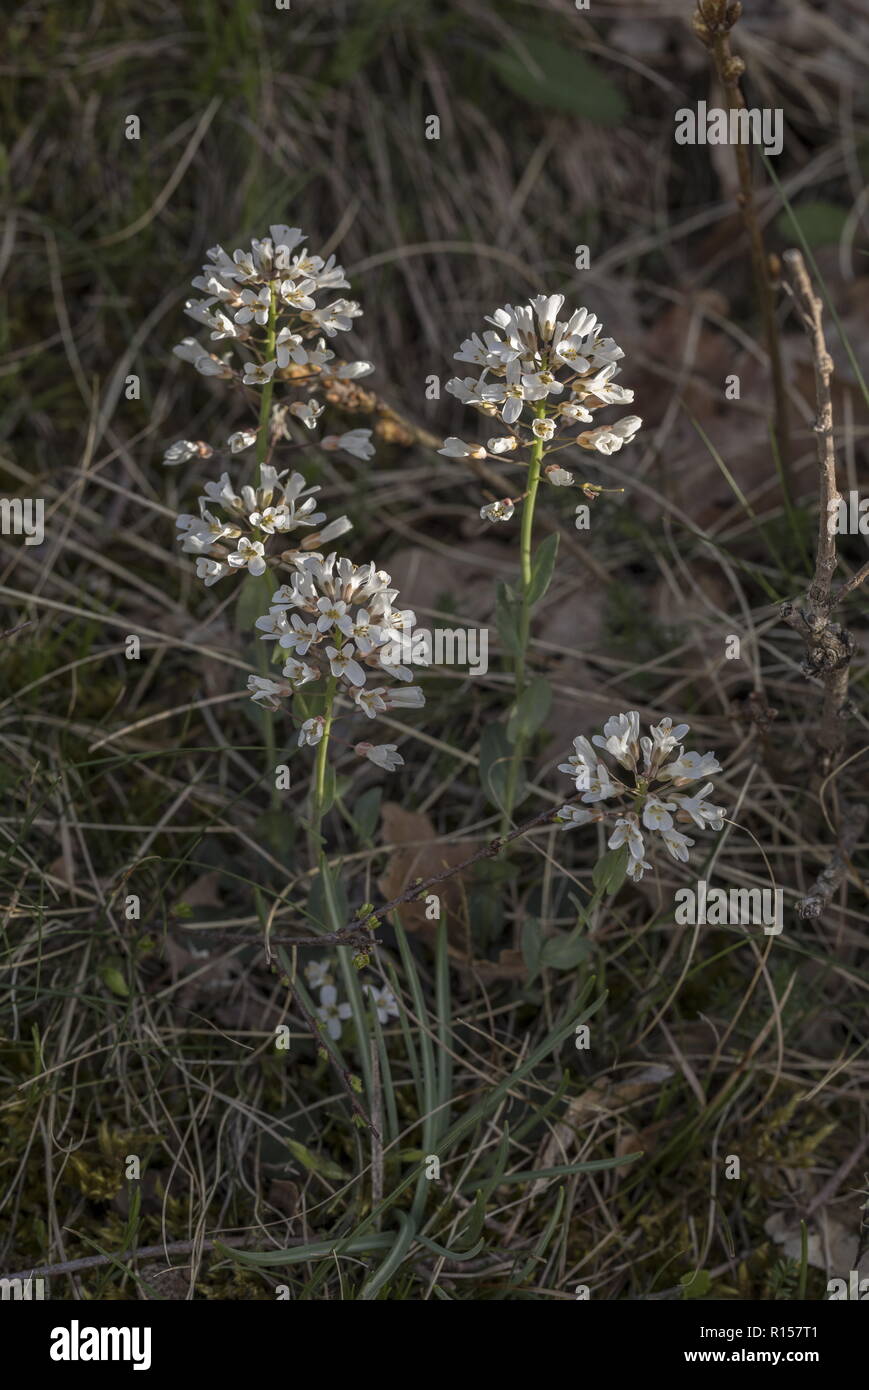 Early penny-cress, Thlaspi praecox, in flower in the Velebit mountains, Croatia. Stock Photo